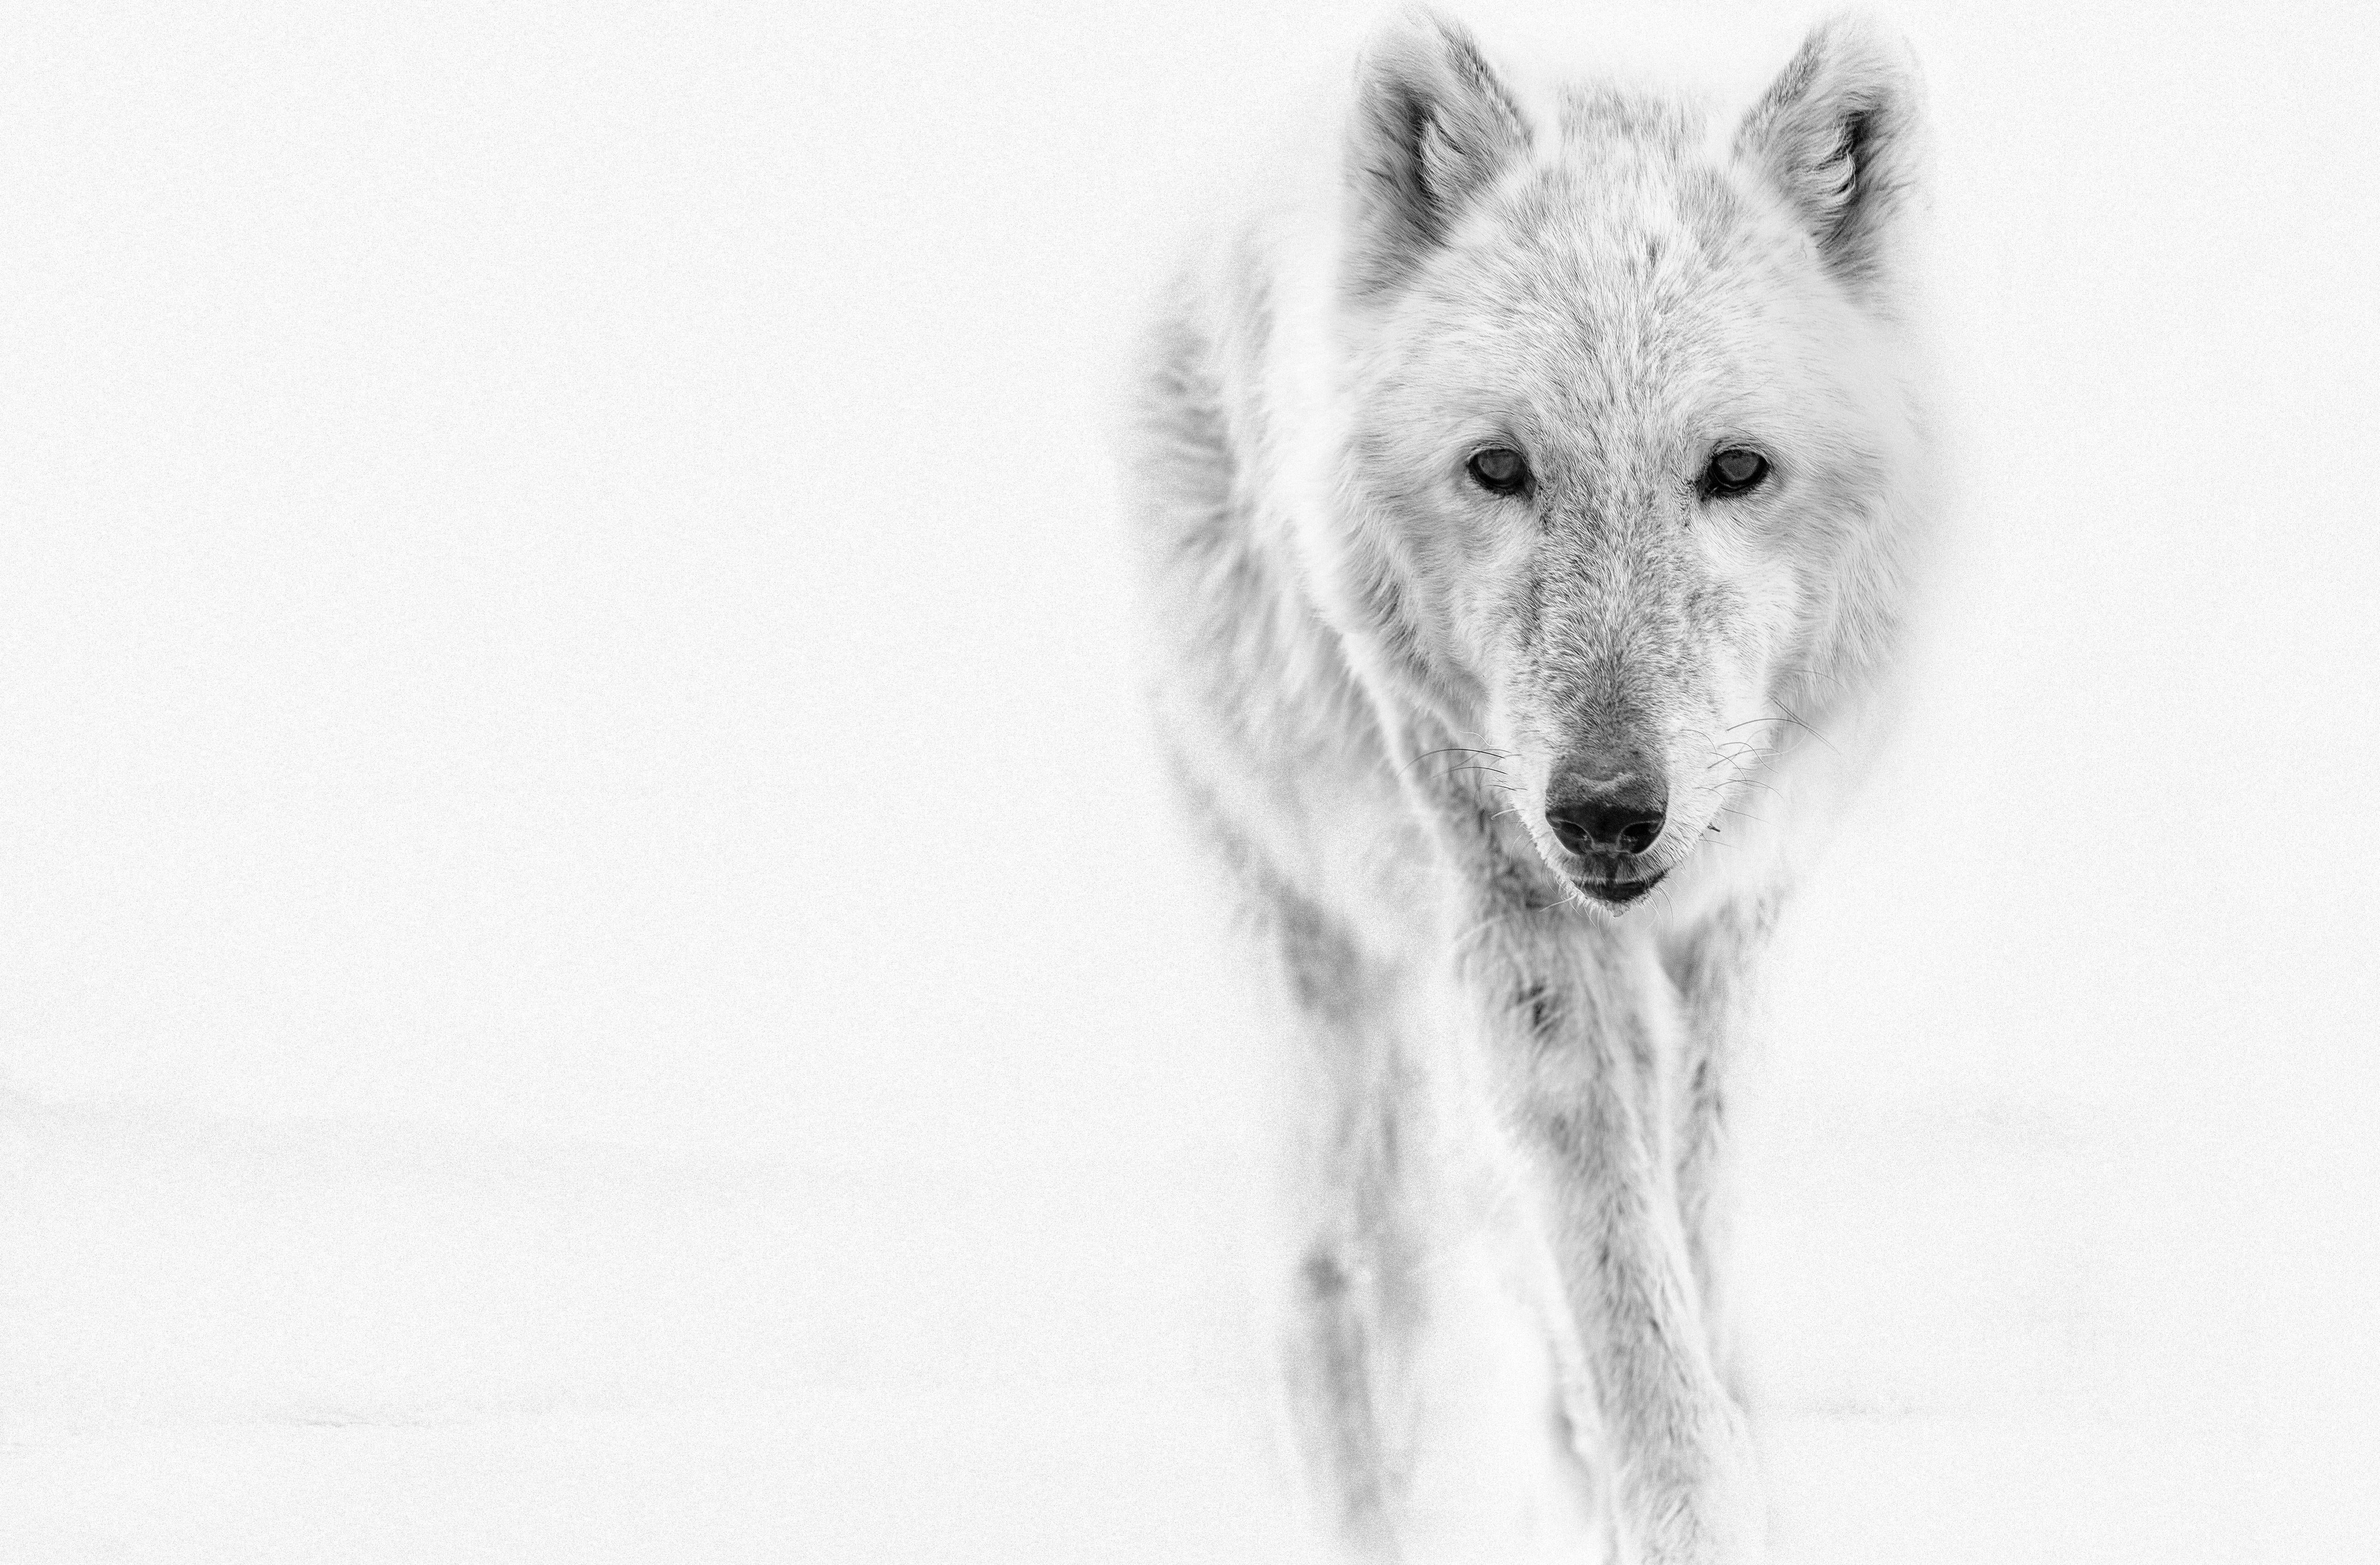 This is a contemporary black and white photograph of an Arctic Wolf
20x30  Edition of 50. 
Signed by Shane on the bottom right.
Printed on the worlds finest archival paper using only archival inks. 

Framing available. Inquire for rates. 

Free